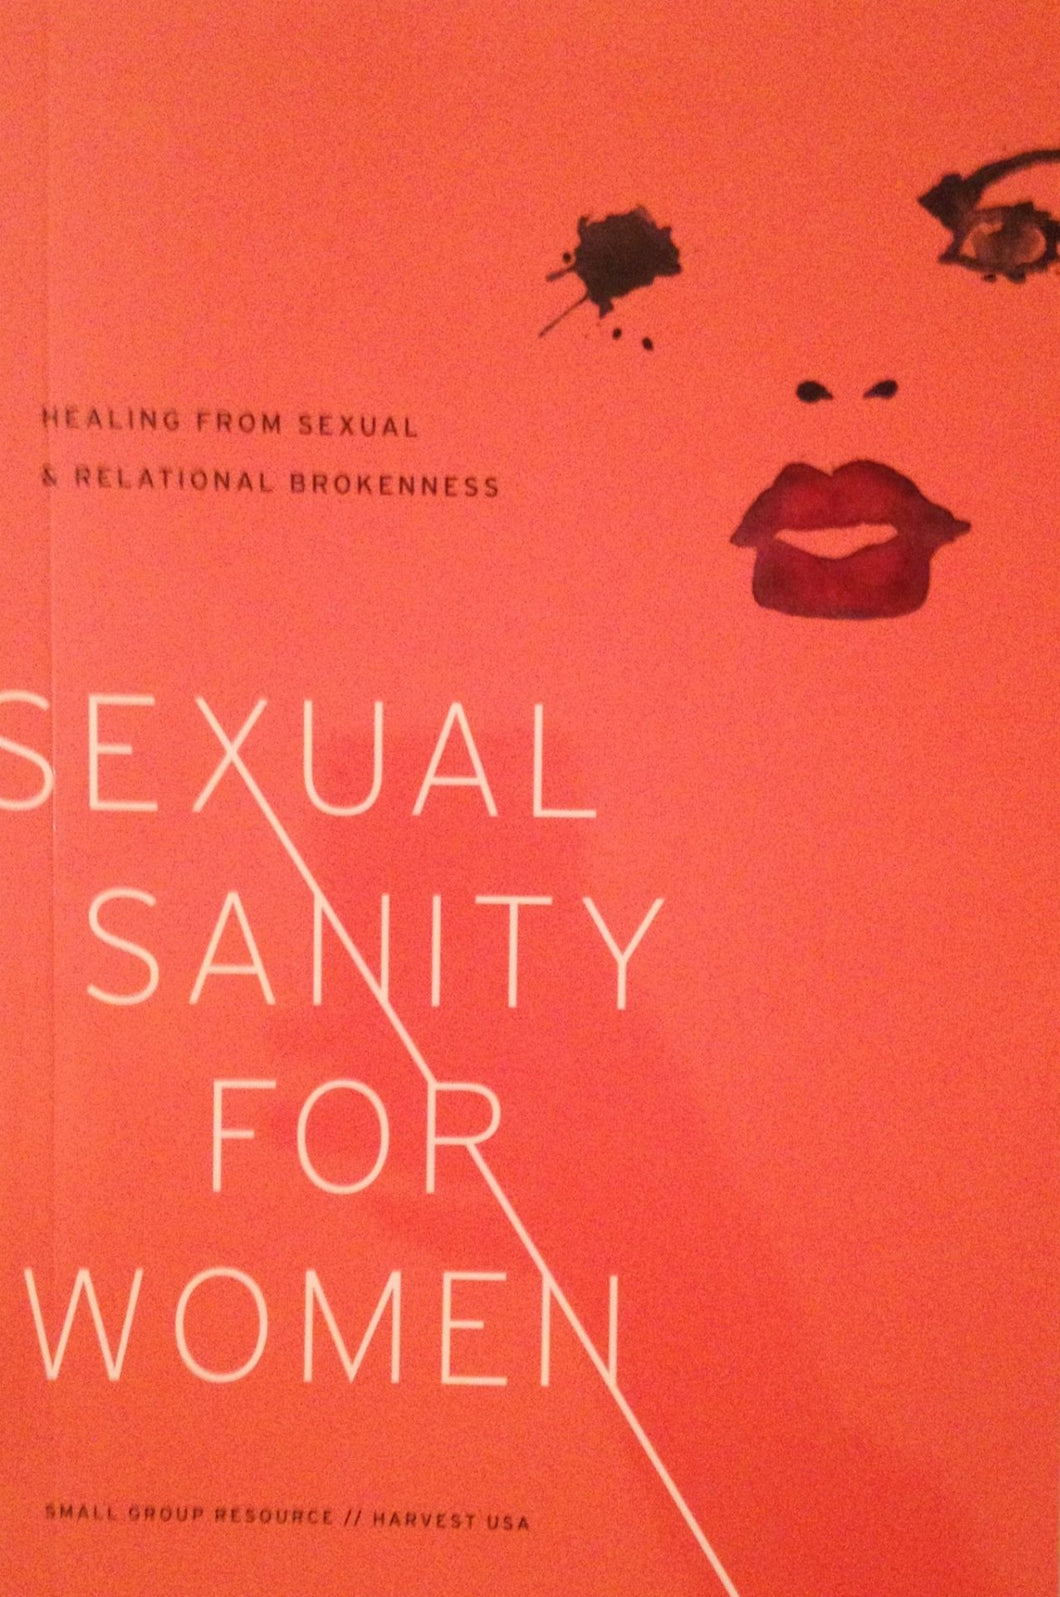 Sexual Sanity for Women: Healing from Sexual and Relational Brokenness